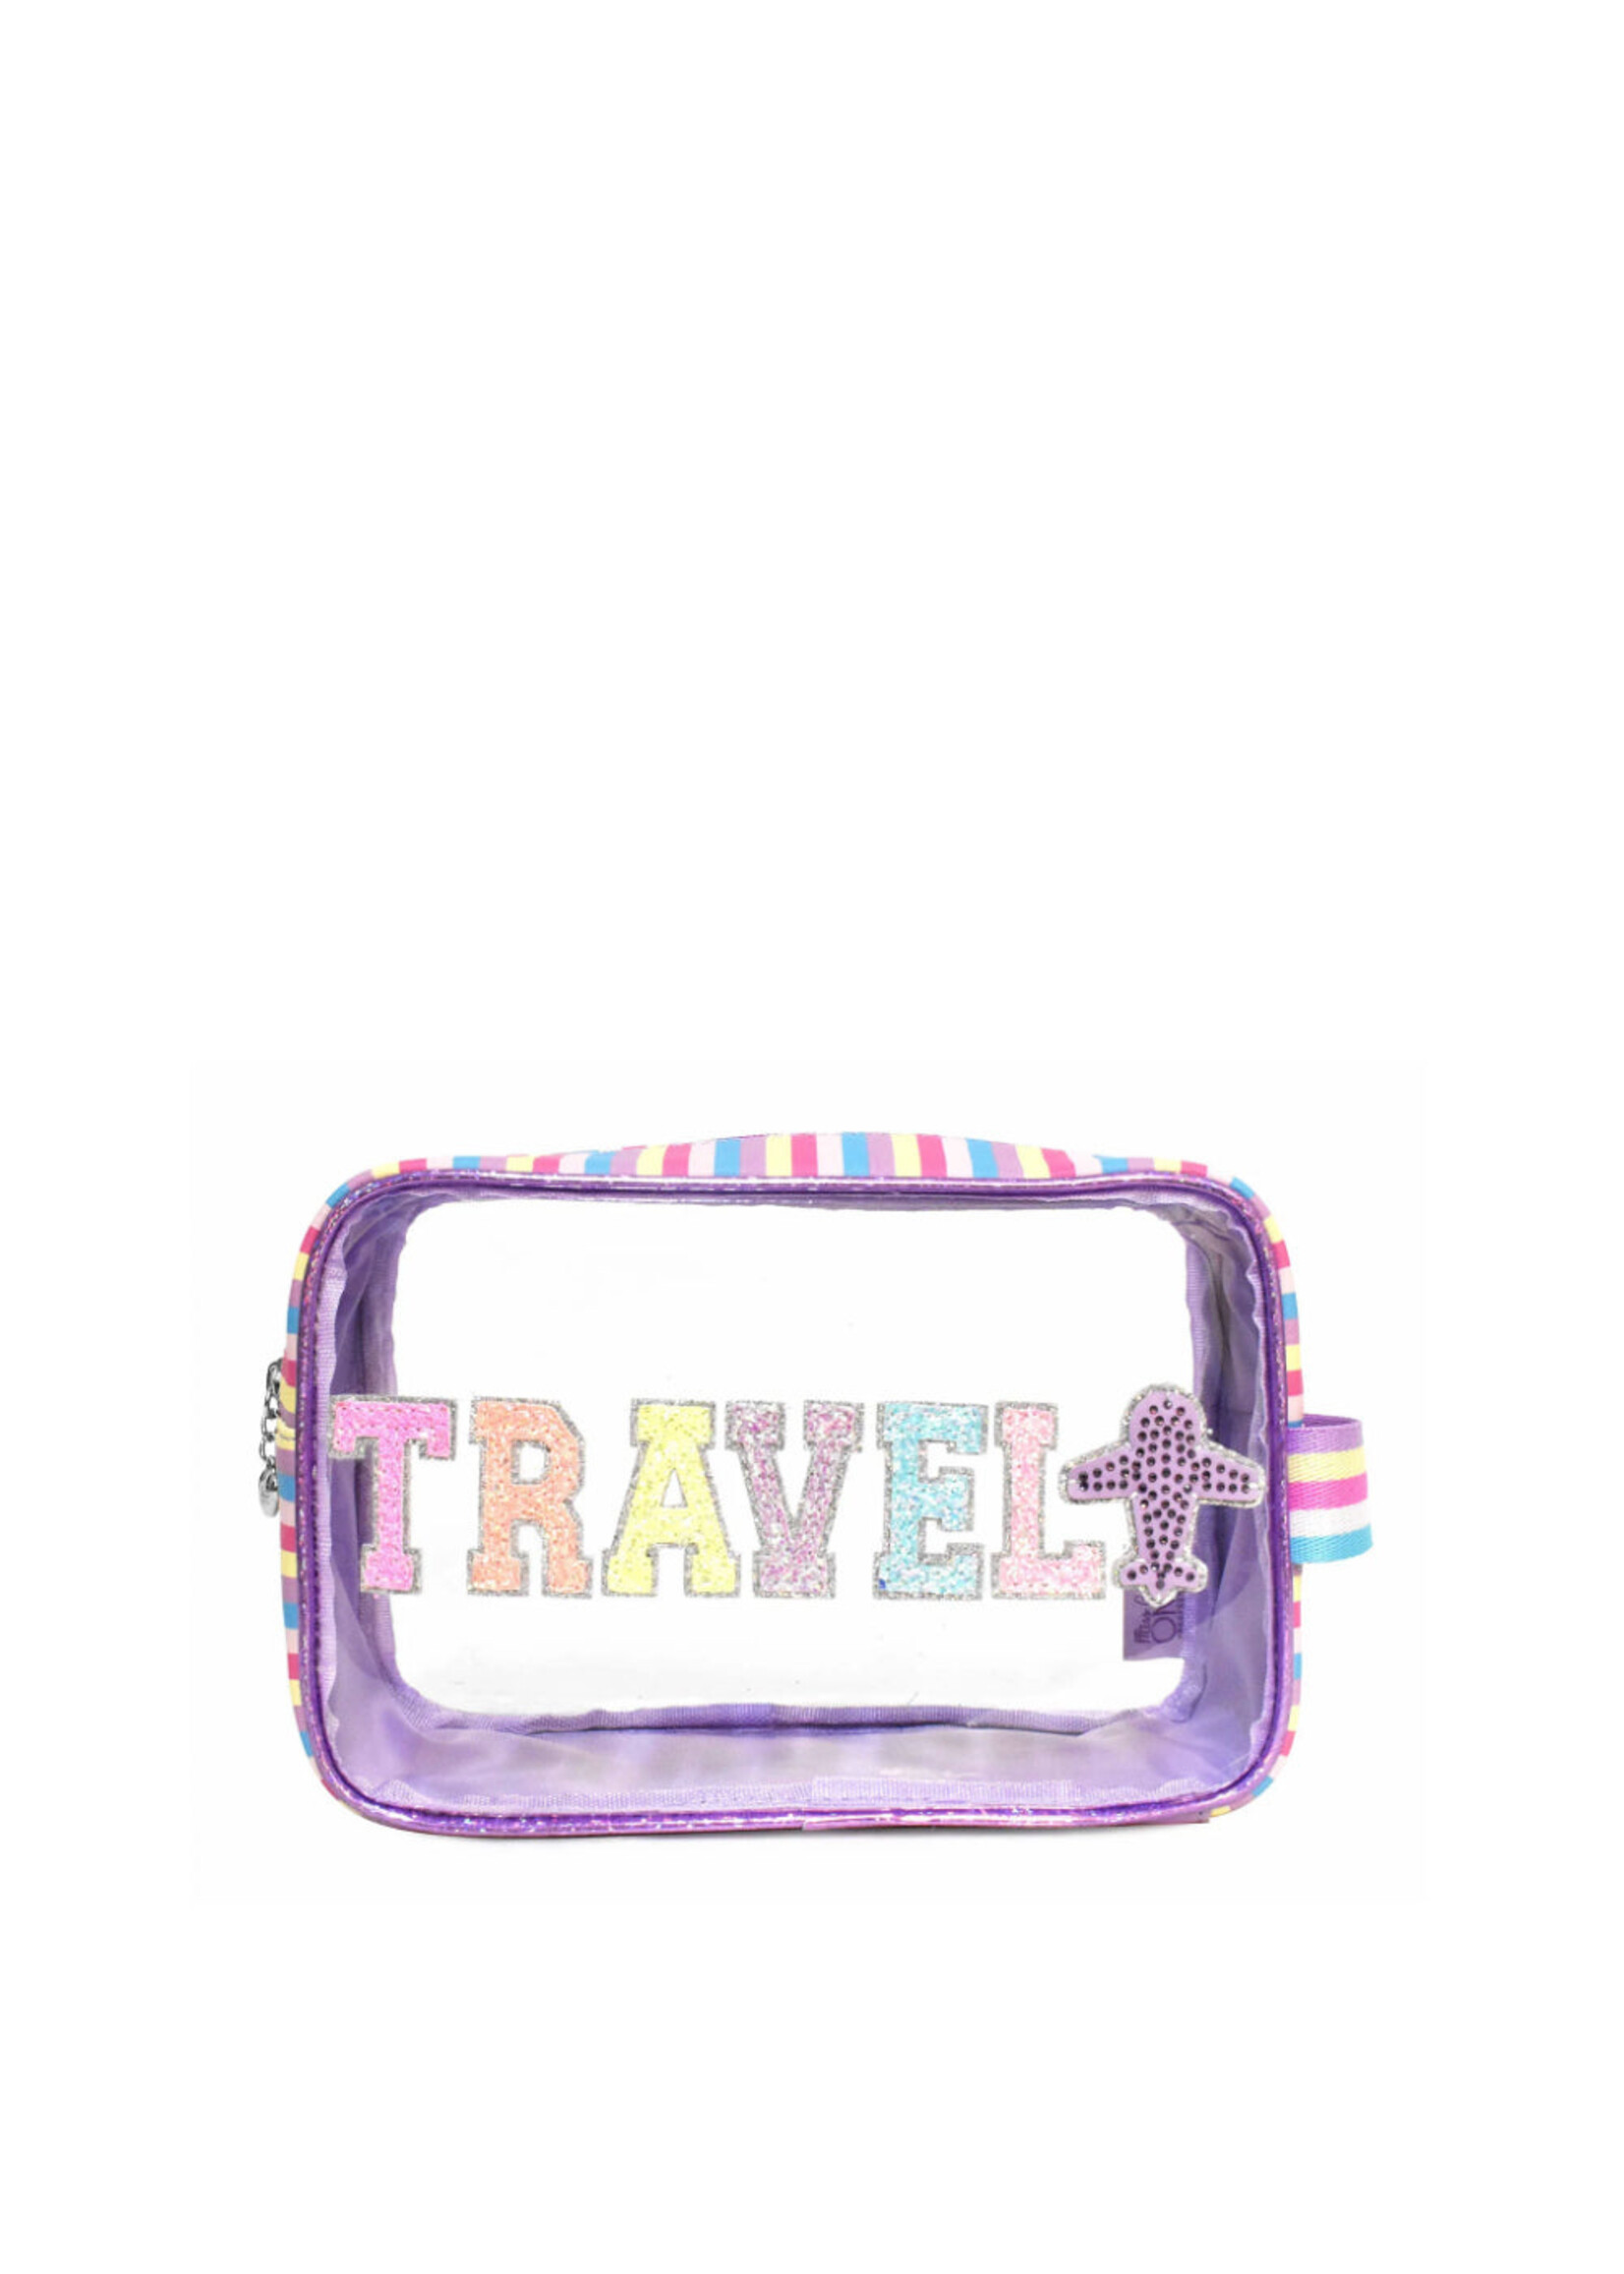 OMG Accessories OMG Accessories Travel Clear Bag